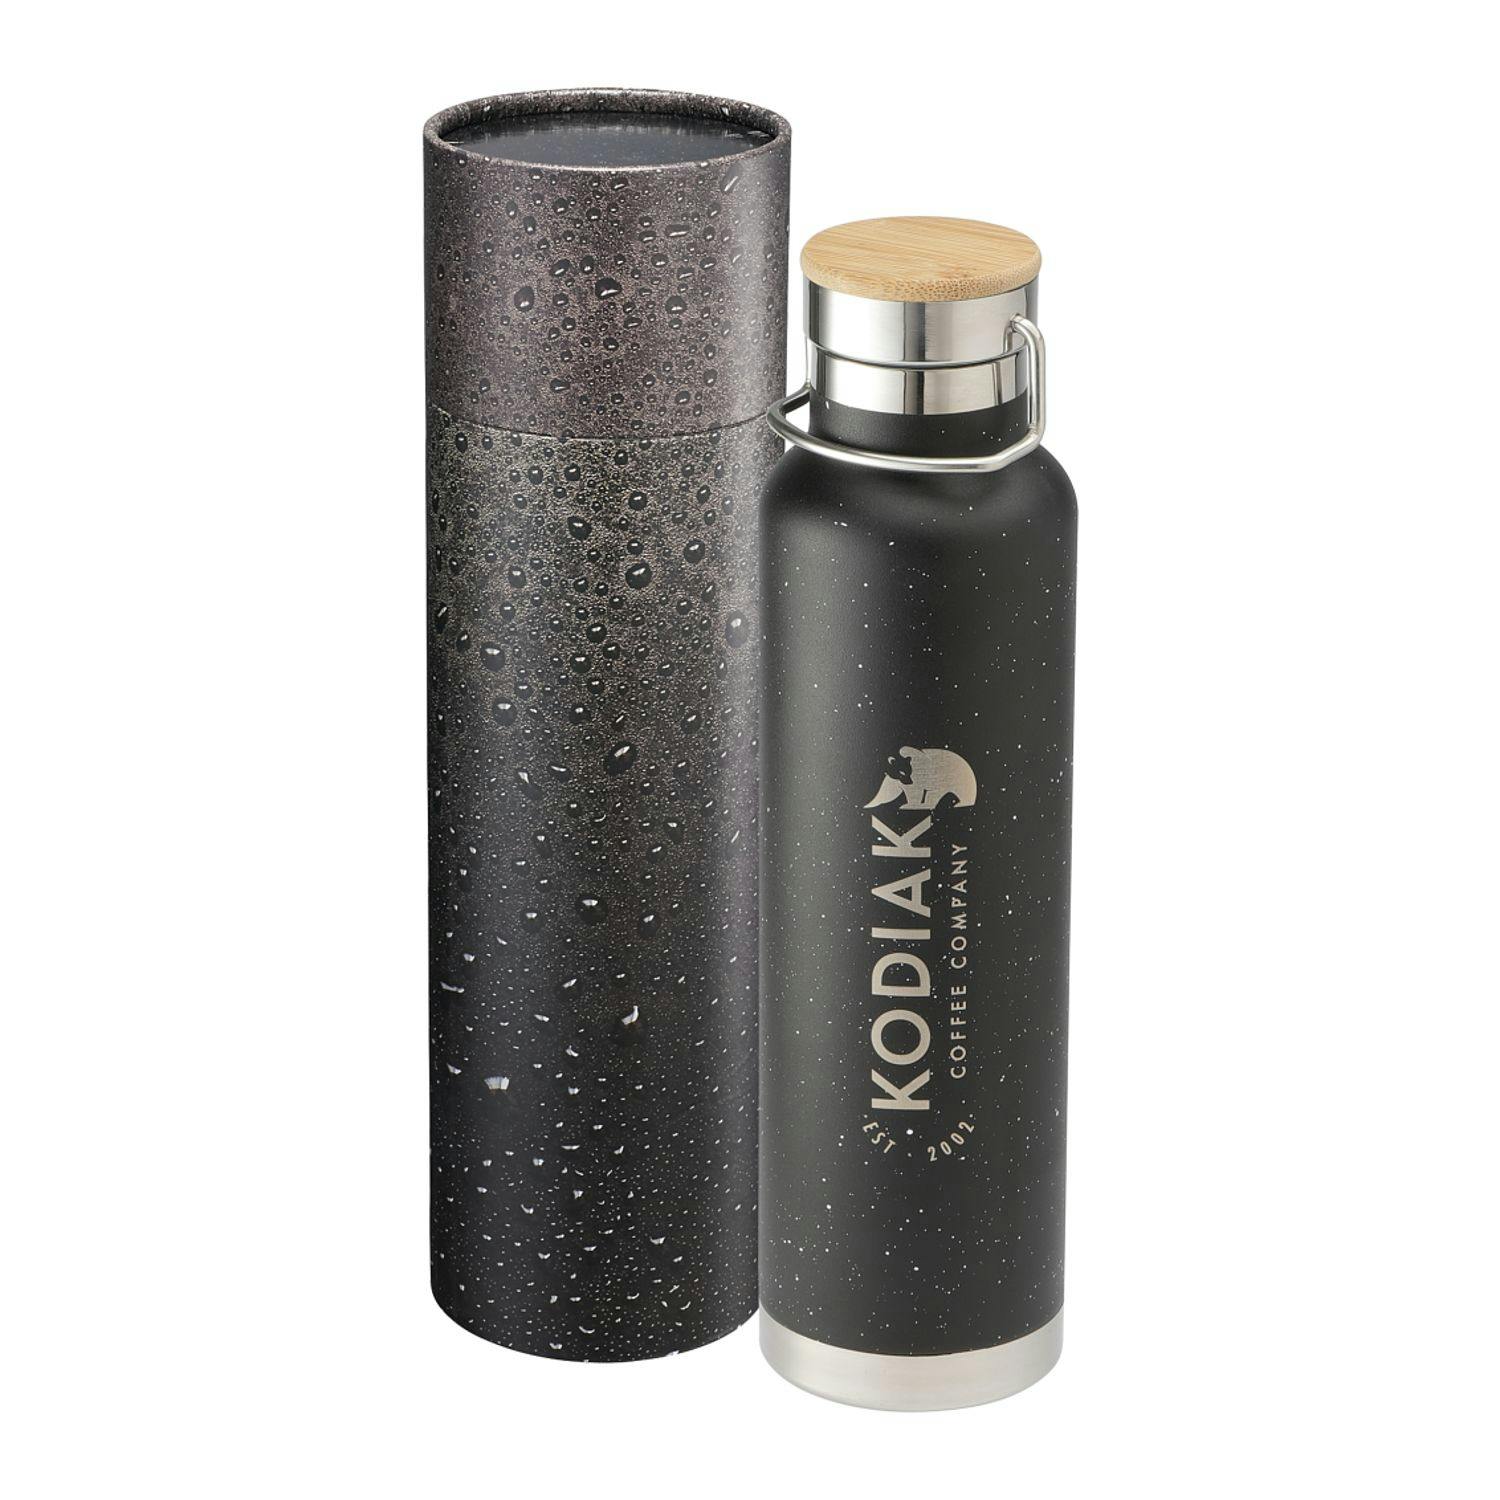 Speckled Thor Bottle 22oz With Cylindrical Box - additional Image 1